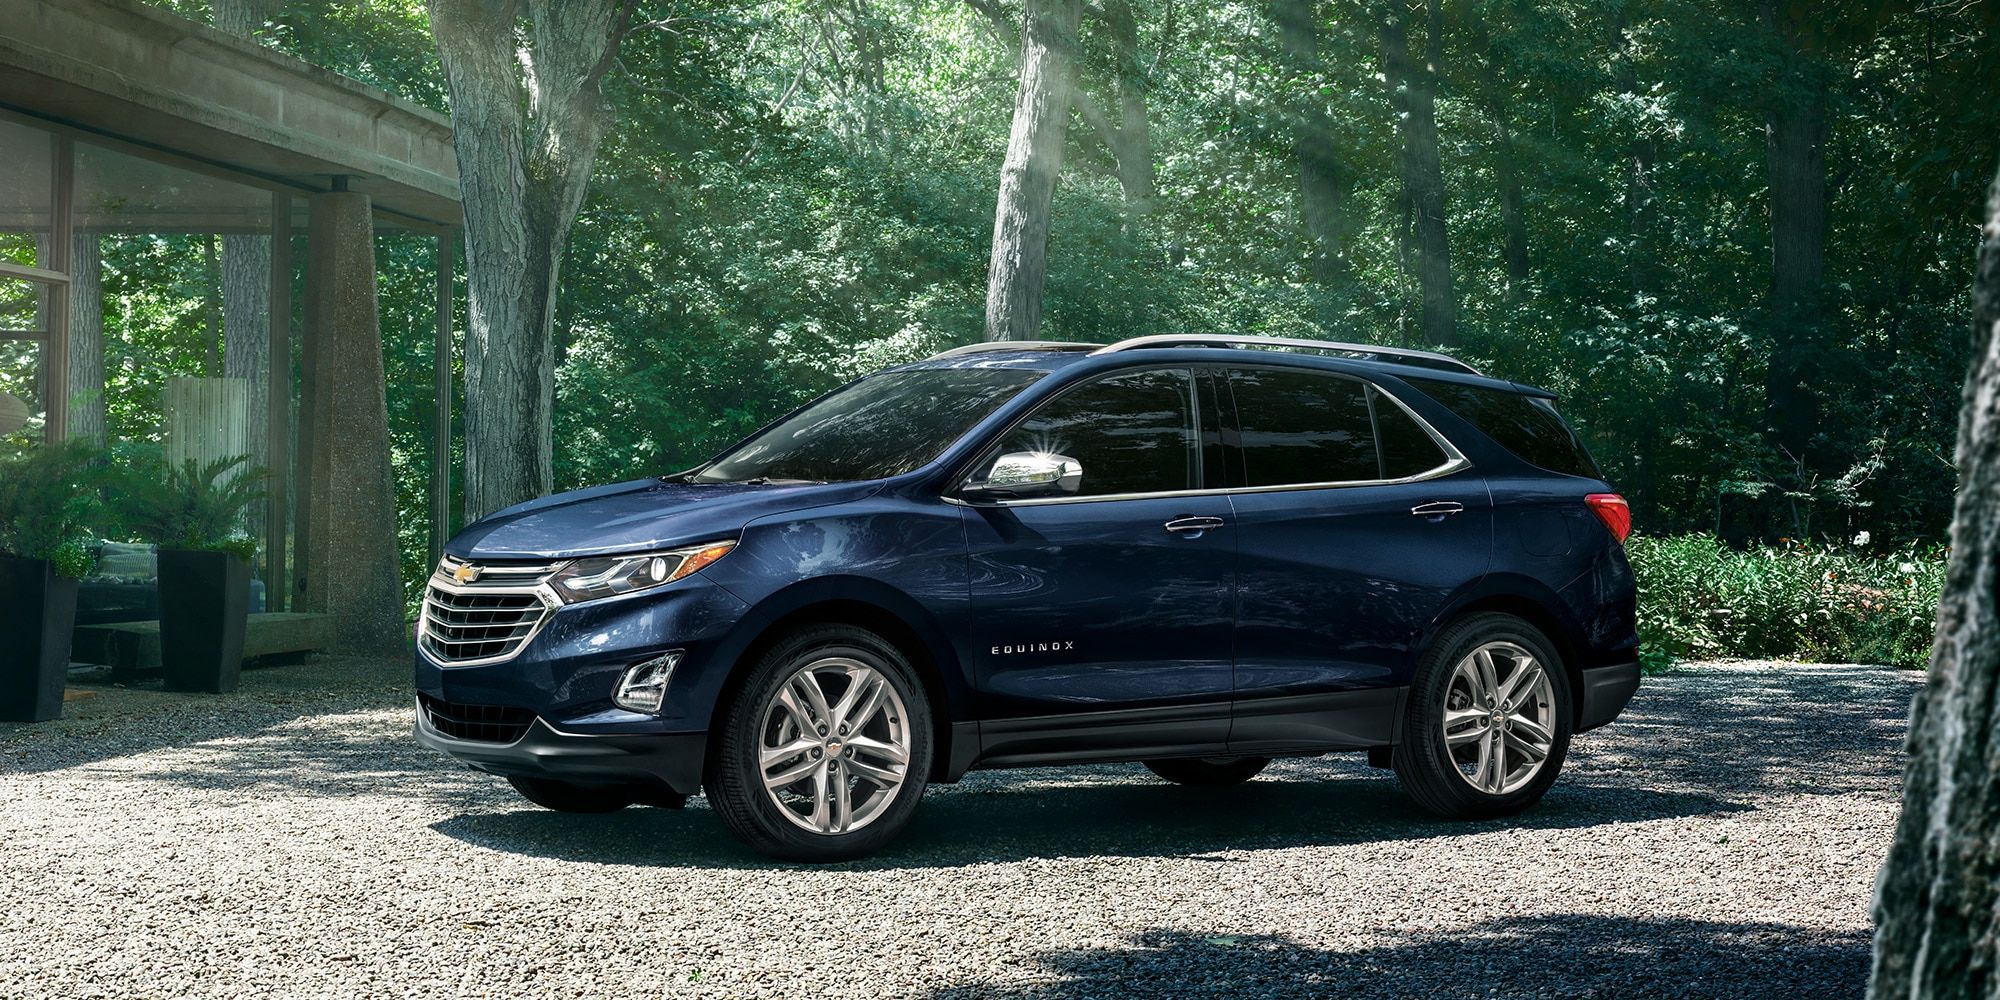 2020 Chevrolet Equinox Review, Pricing, and Specs